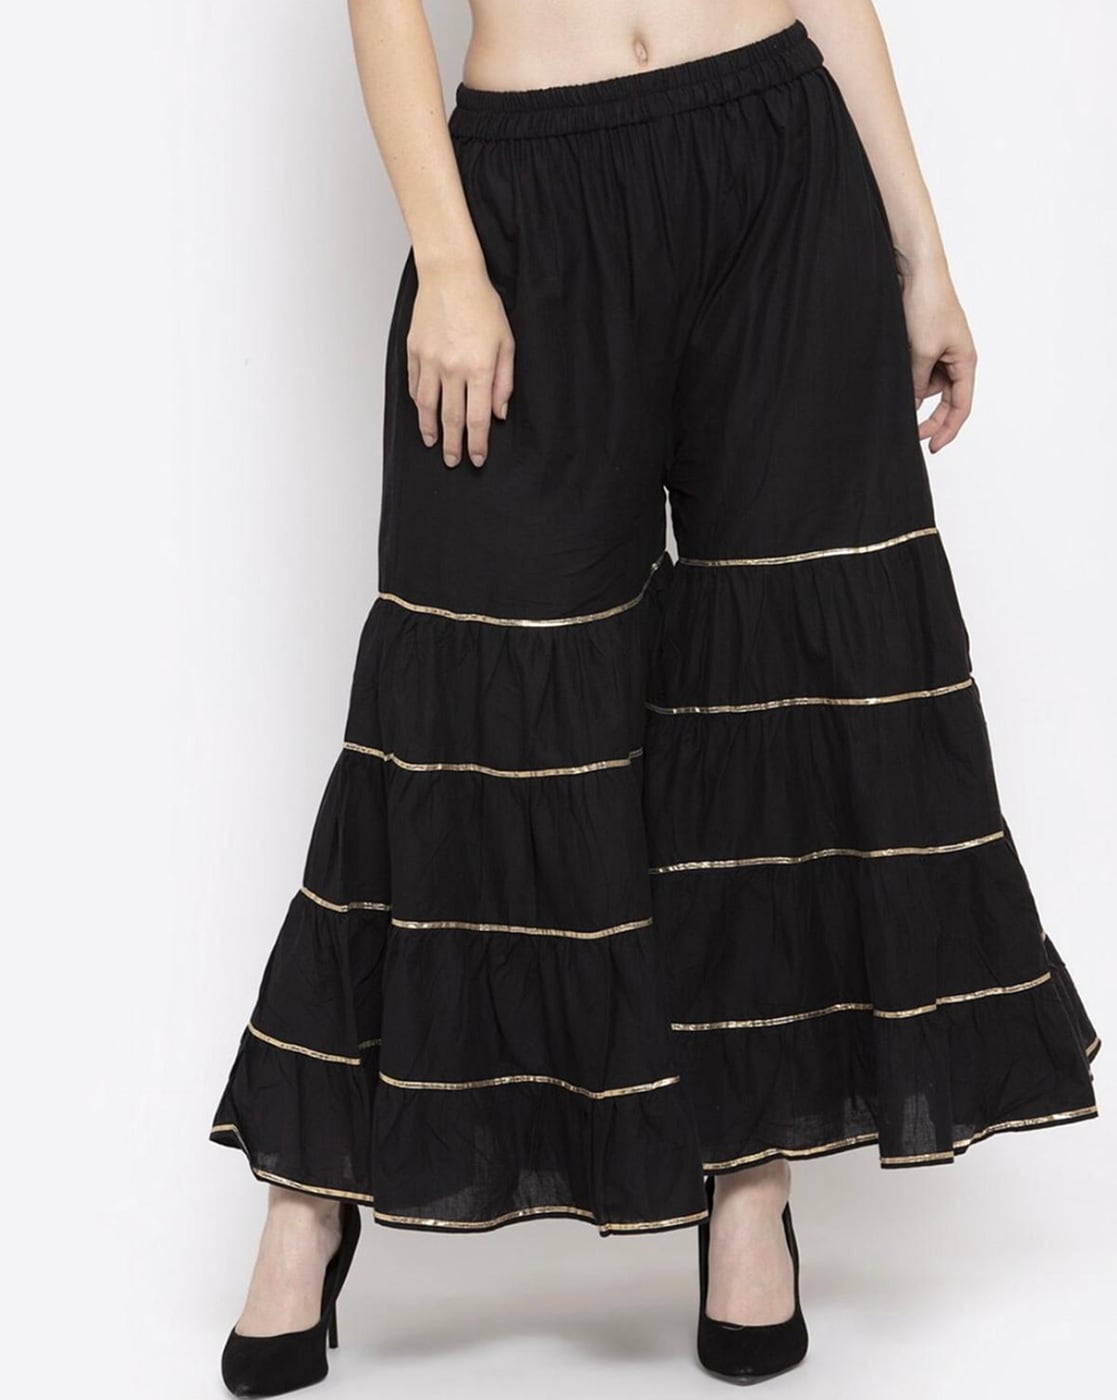 Shop Black Gharara Pants for Women Online from India's Luxury Designers 2023